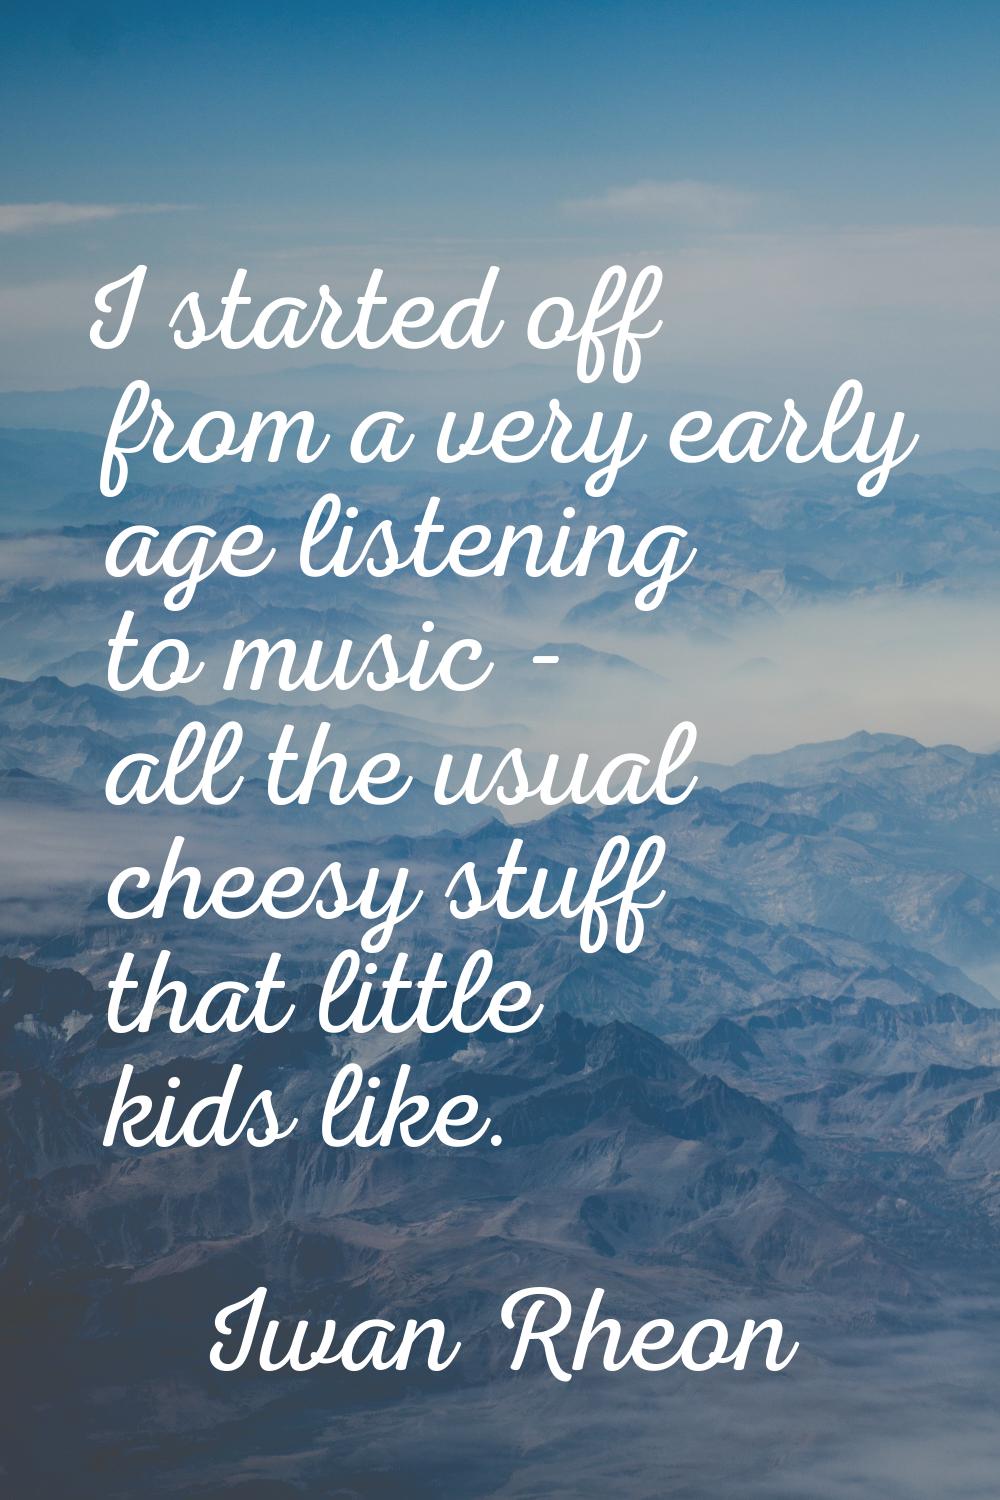 I started off from a very early age listening to music - all the usual cheesy stuff that little kid